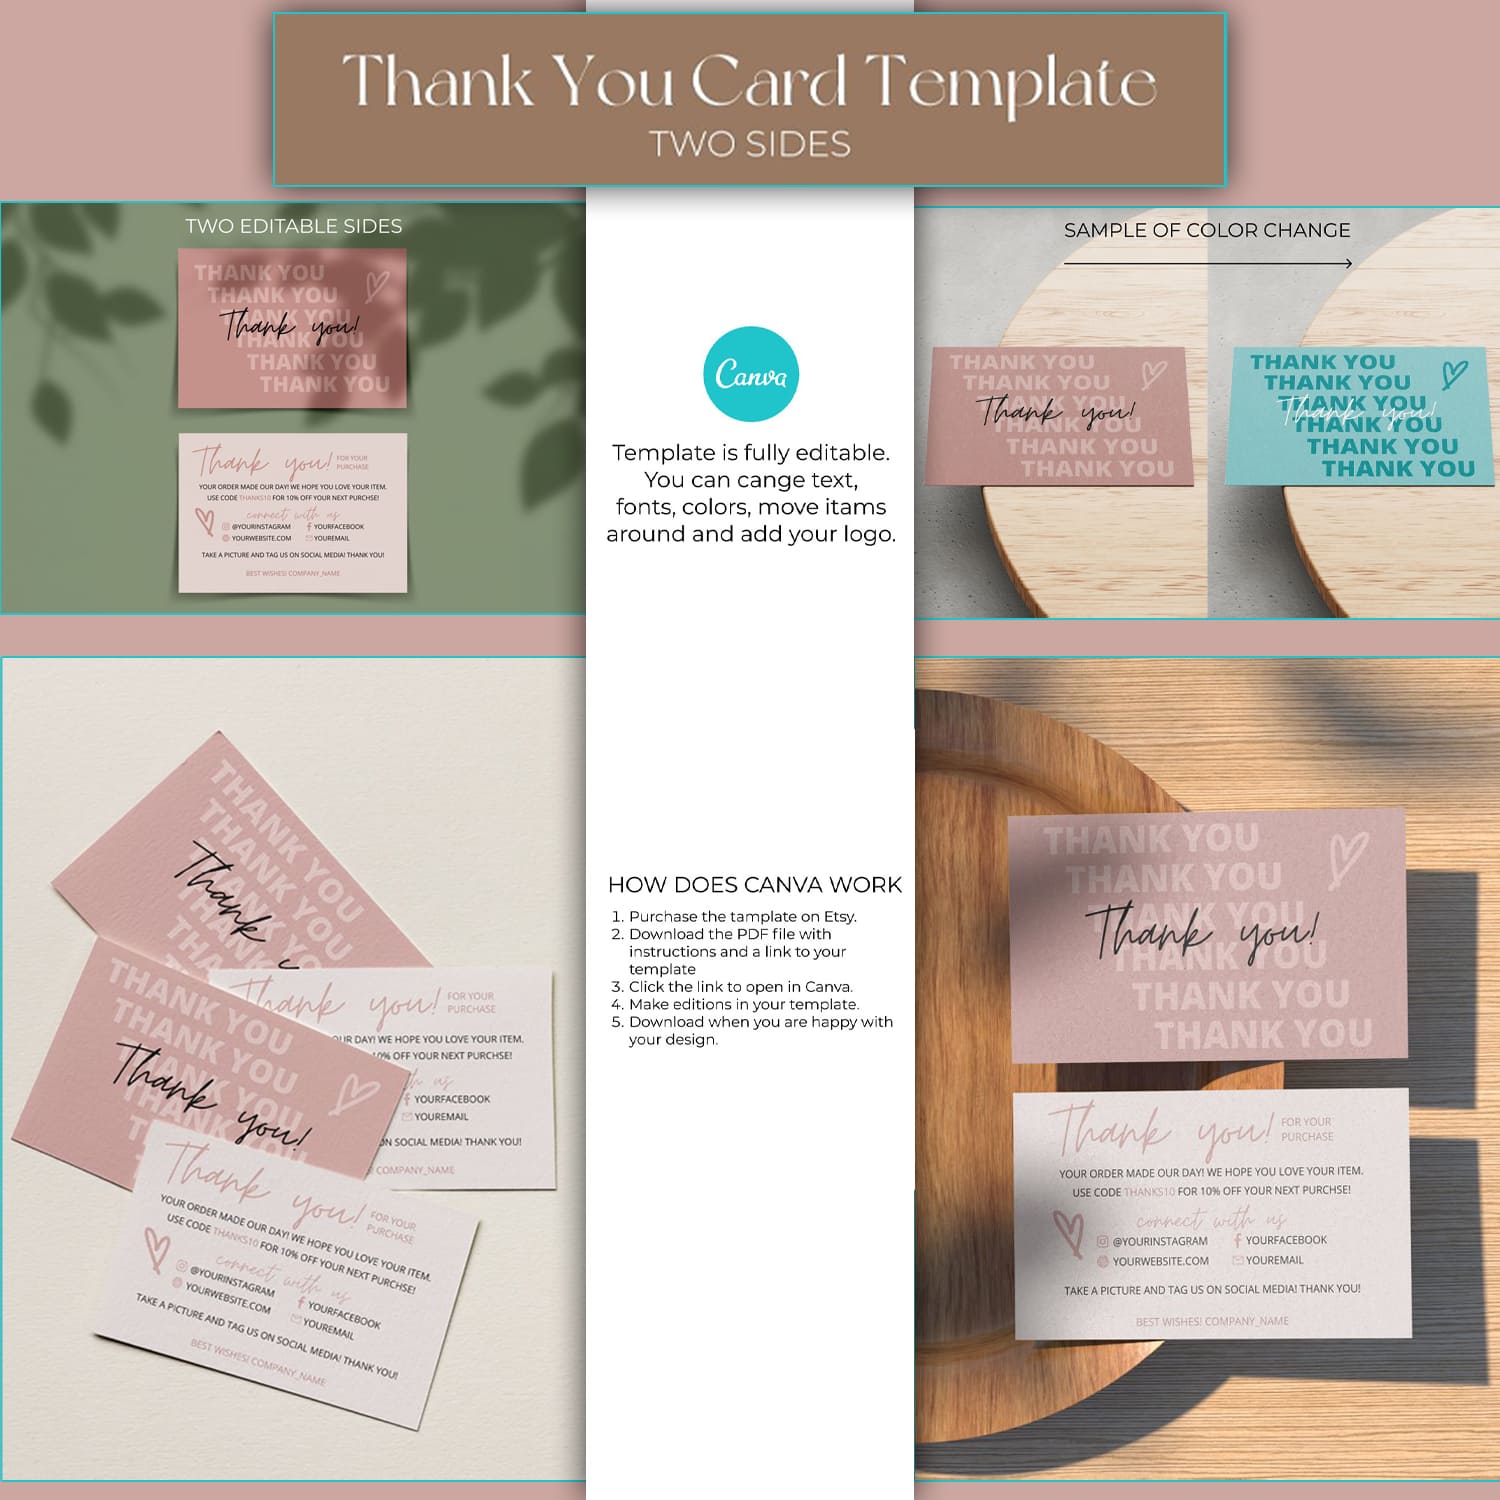 Thank You Card Template cover.